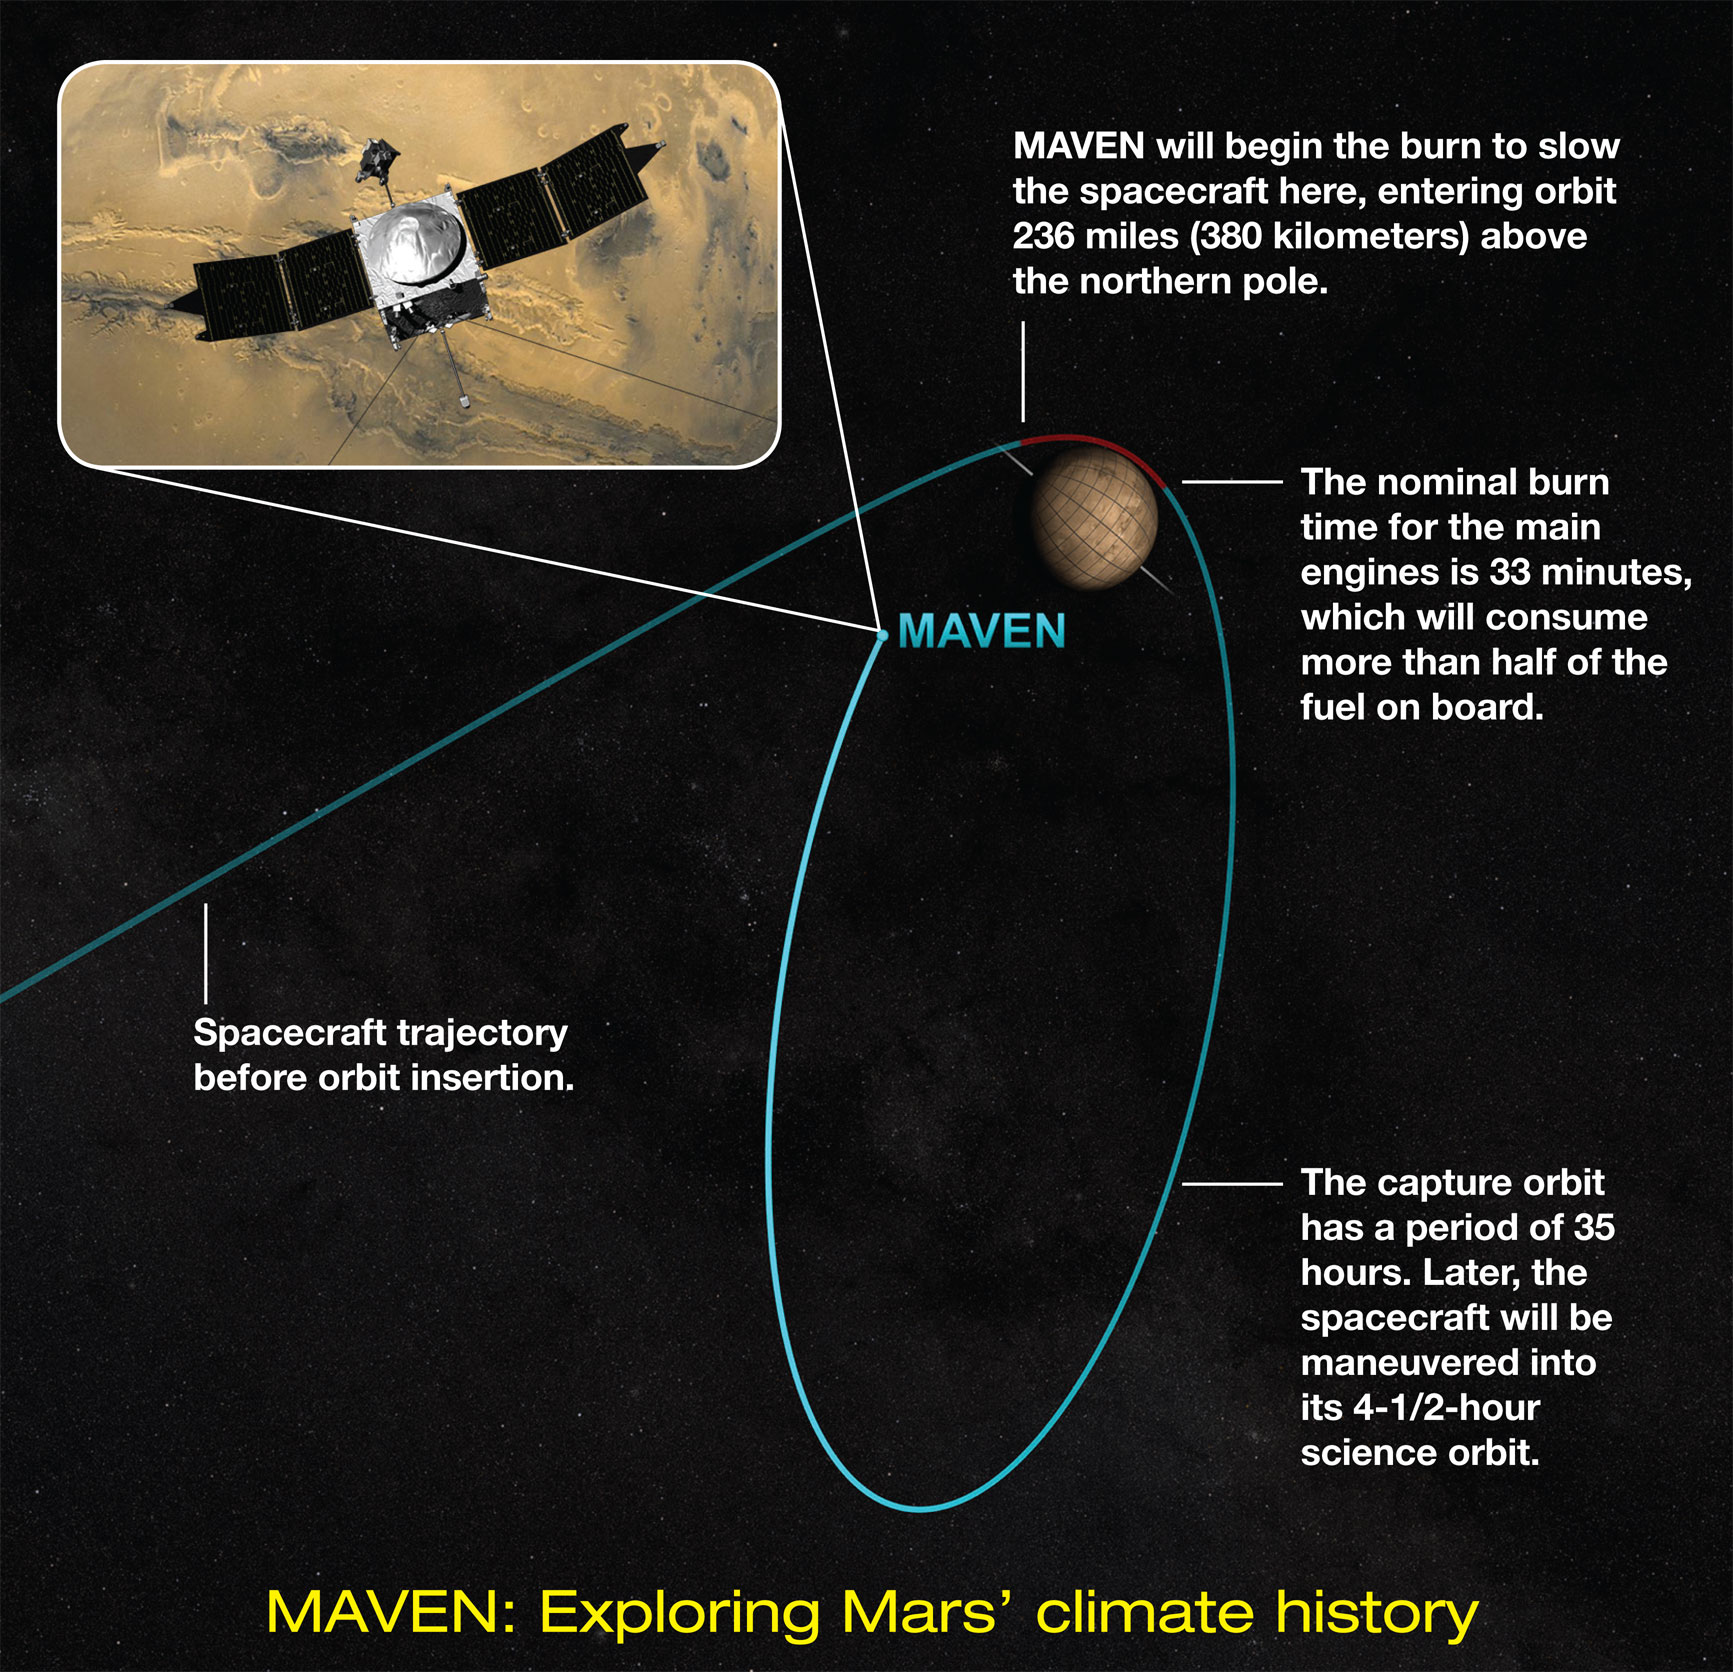 This image shows an artist concept of the trajectory of NASA’s MAVEN mission as it approached the Red Planet. MAVEN entered orbit around Mars on Sept. 21, 2014, completing an interplanetary journey of 10 months and 442 million miles (711 million kilometers). Credit: NASA’s Goddard Space Flight Center/Univ. of Colorado